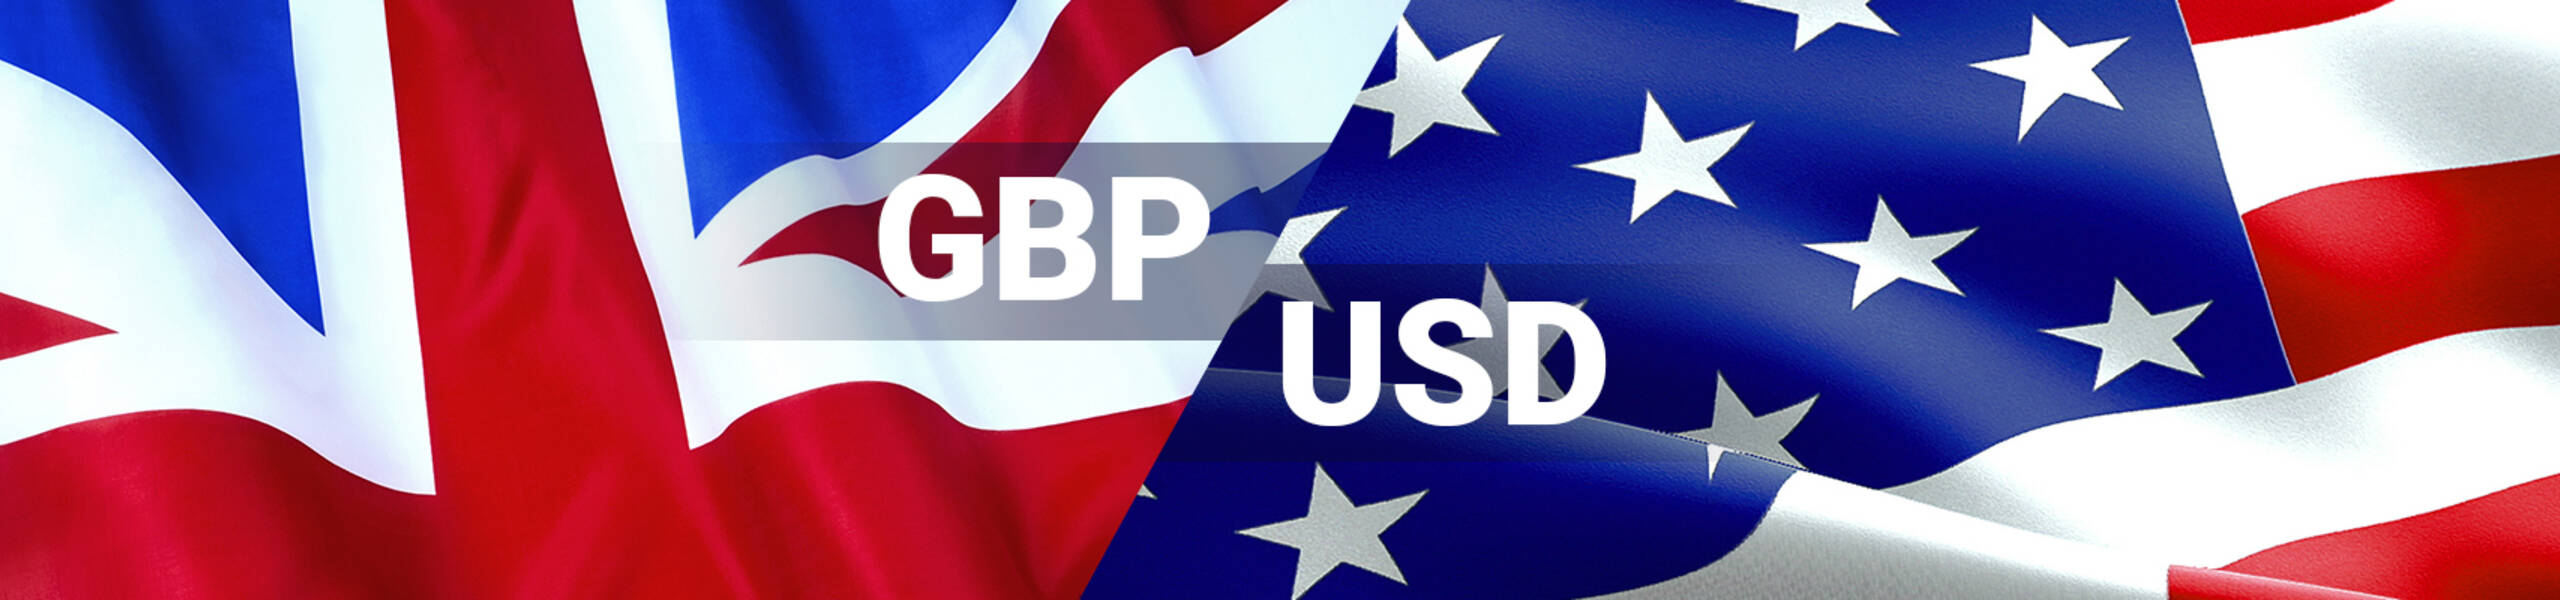 GBP/USD: uptrend may continue